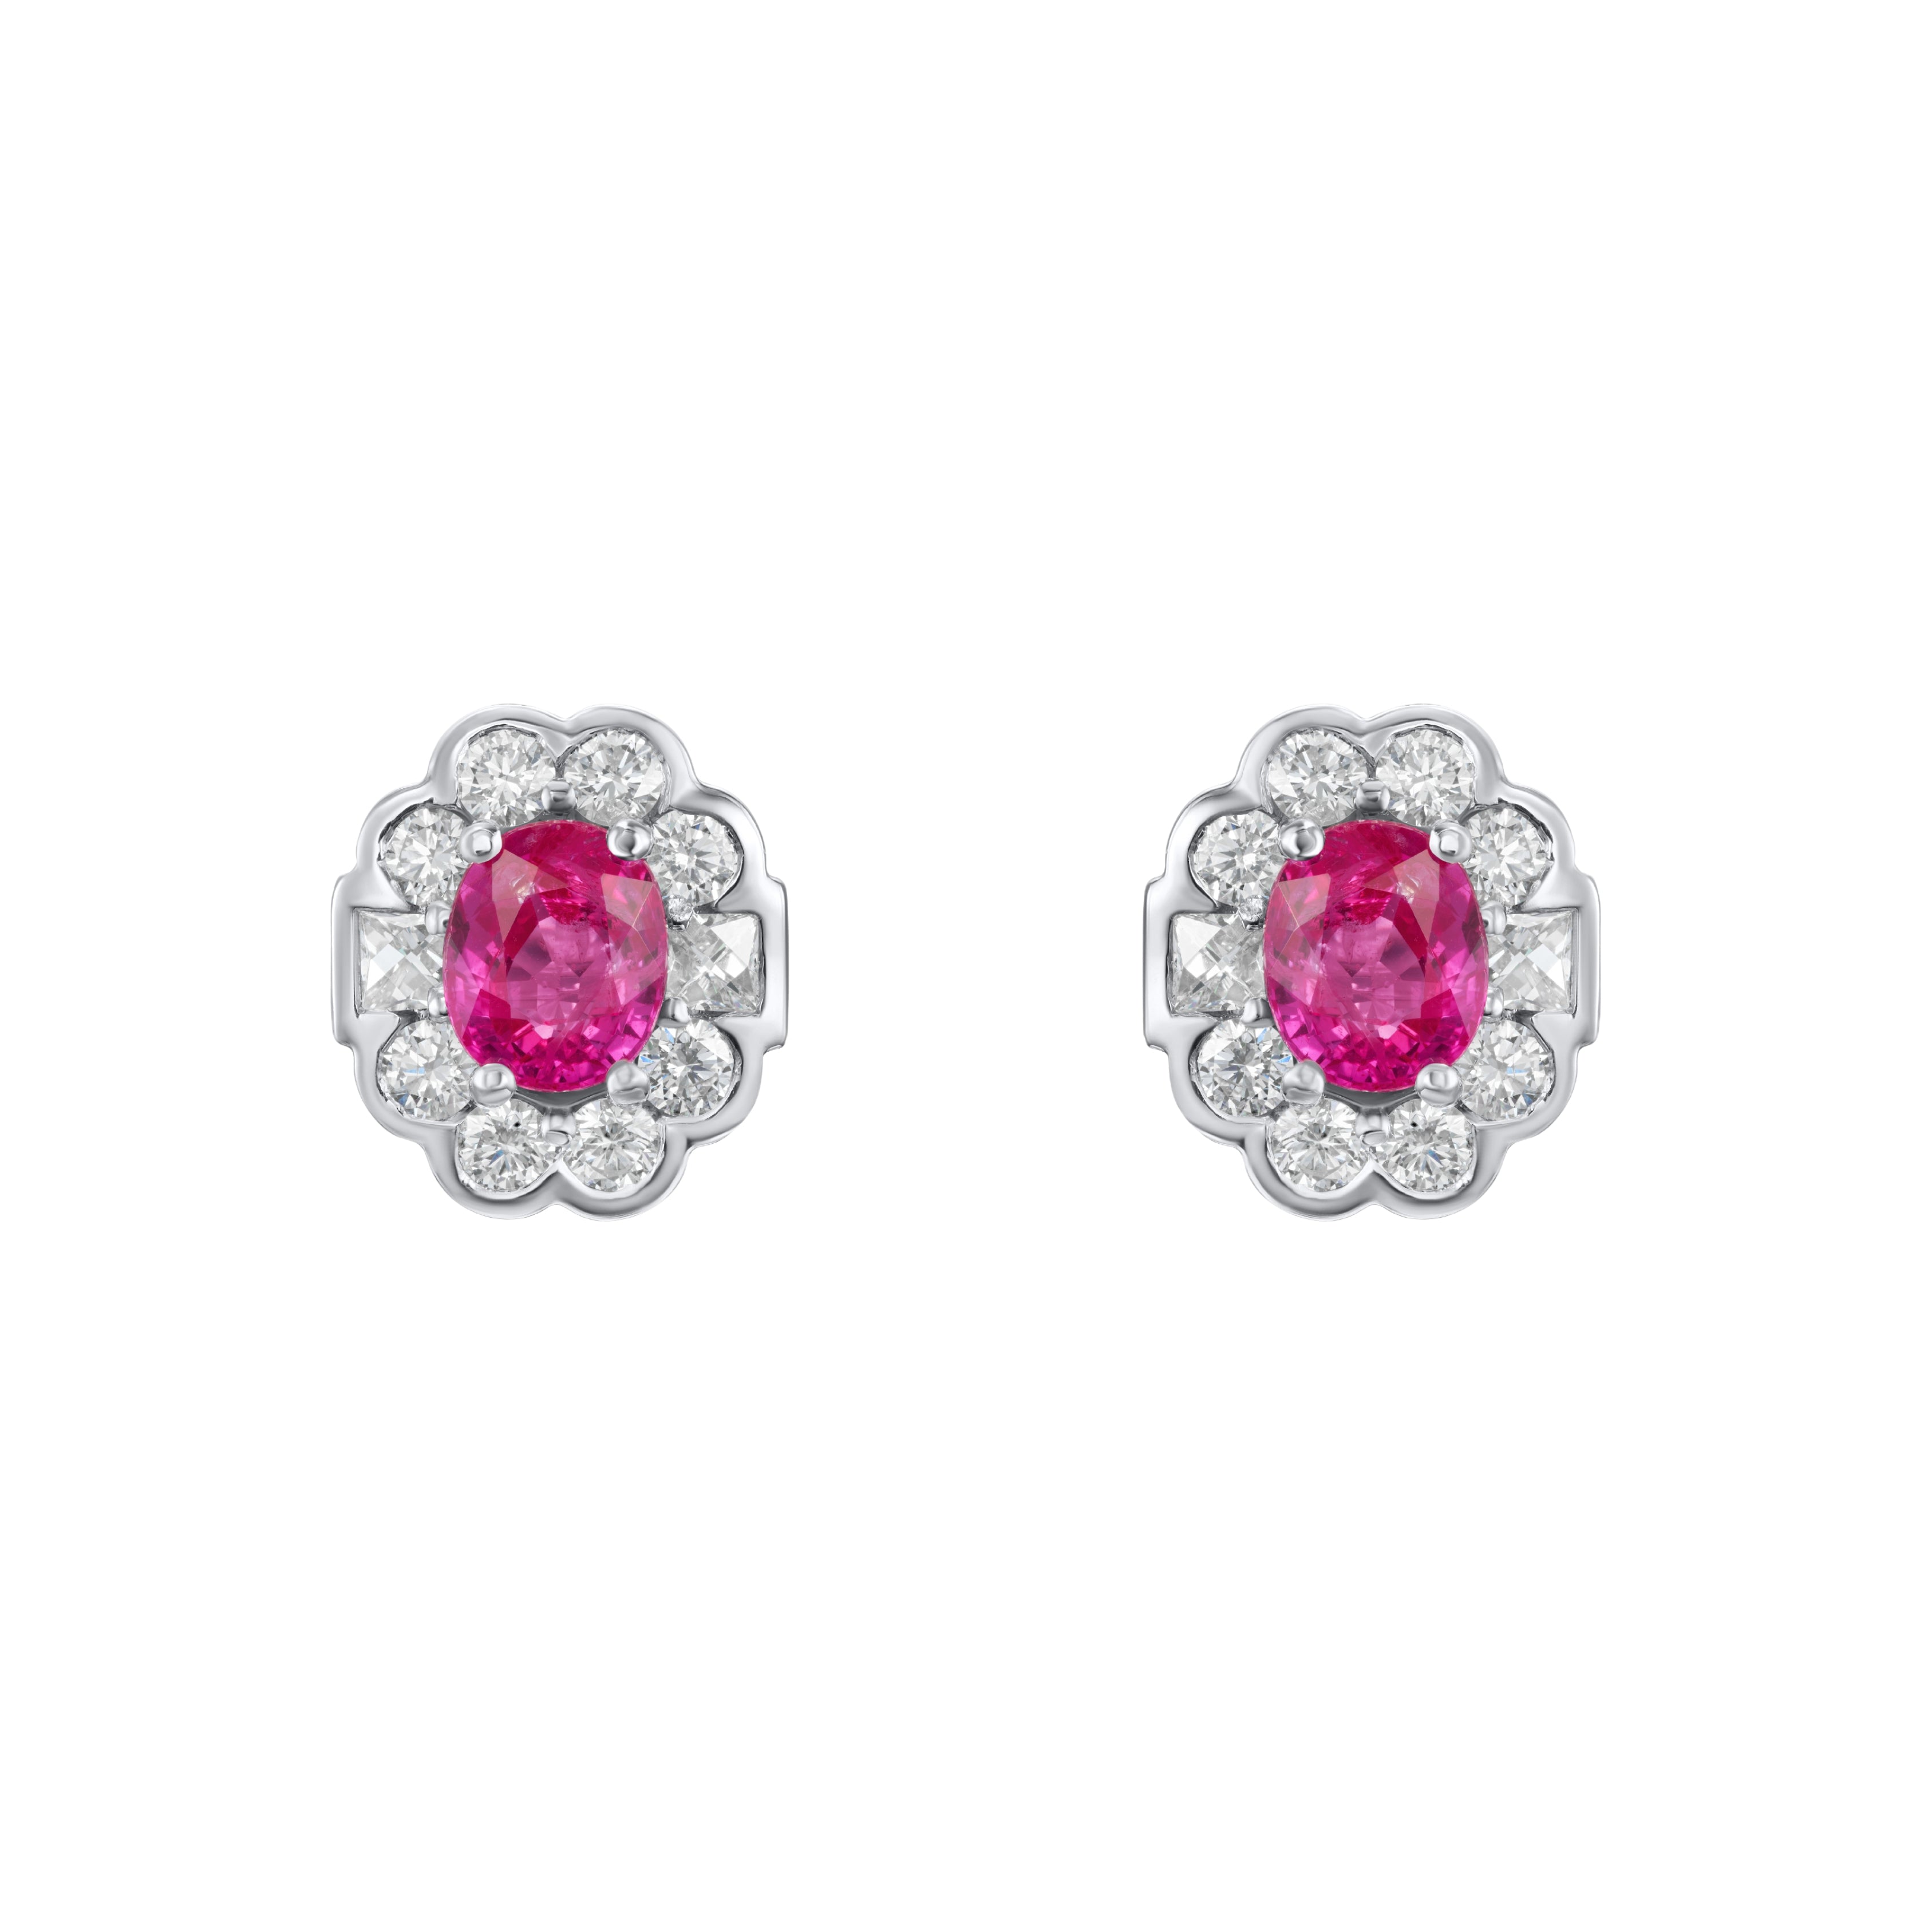 2.08cts Ruby and Diamond Cluster Earrings